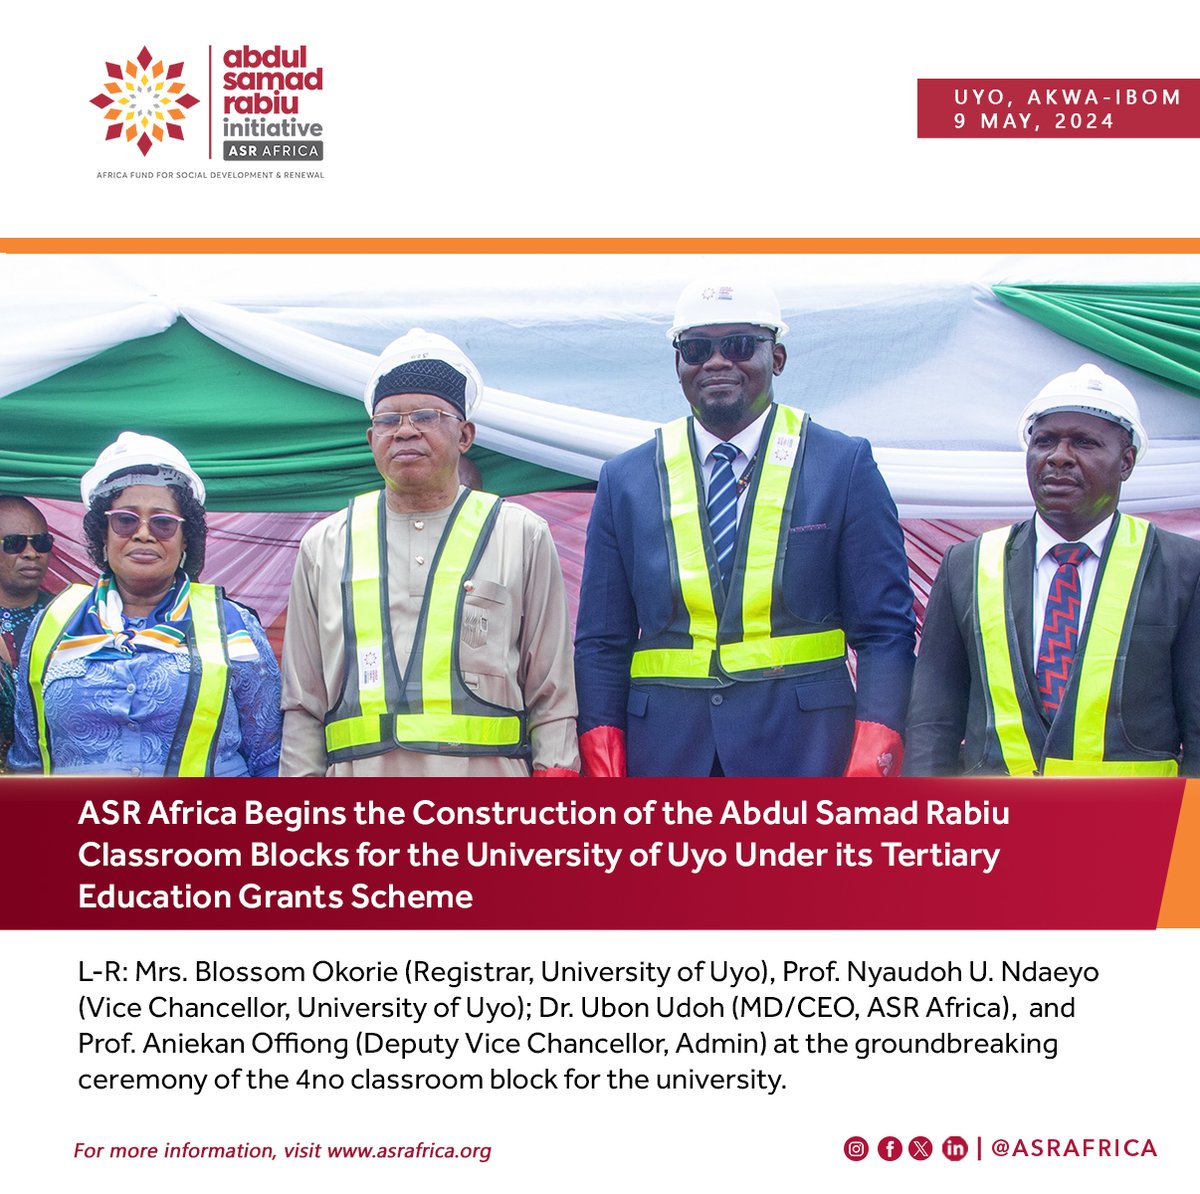 ASR Africa is excited to announce the commencement of construction for a new classroom block at the University of Uyo, with a groundbreaking ceremony. This project is part of ASR Africa's commitment to enhancing educational infrastructure and supporting academic success across